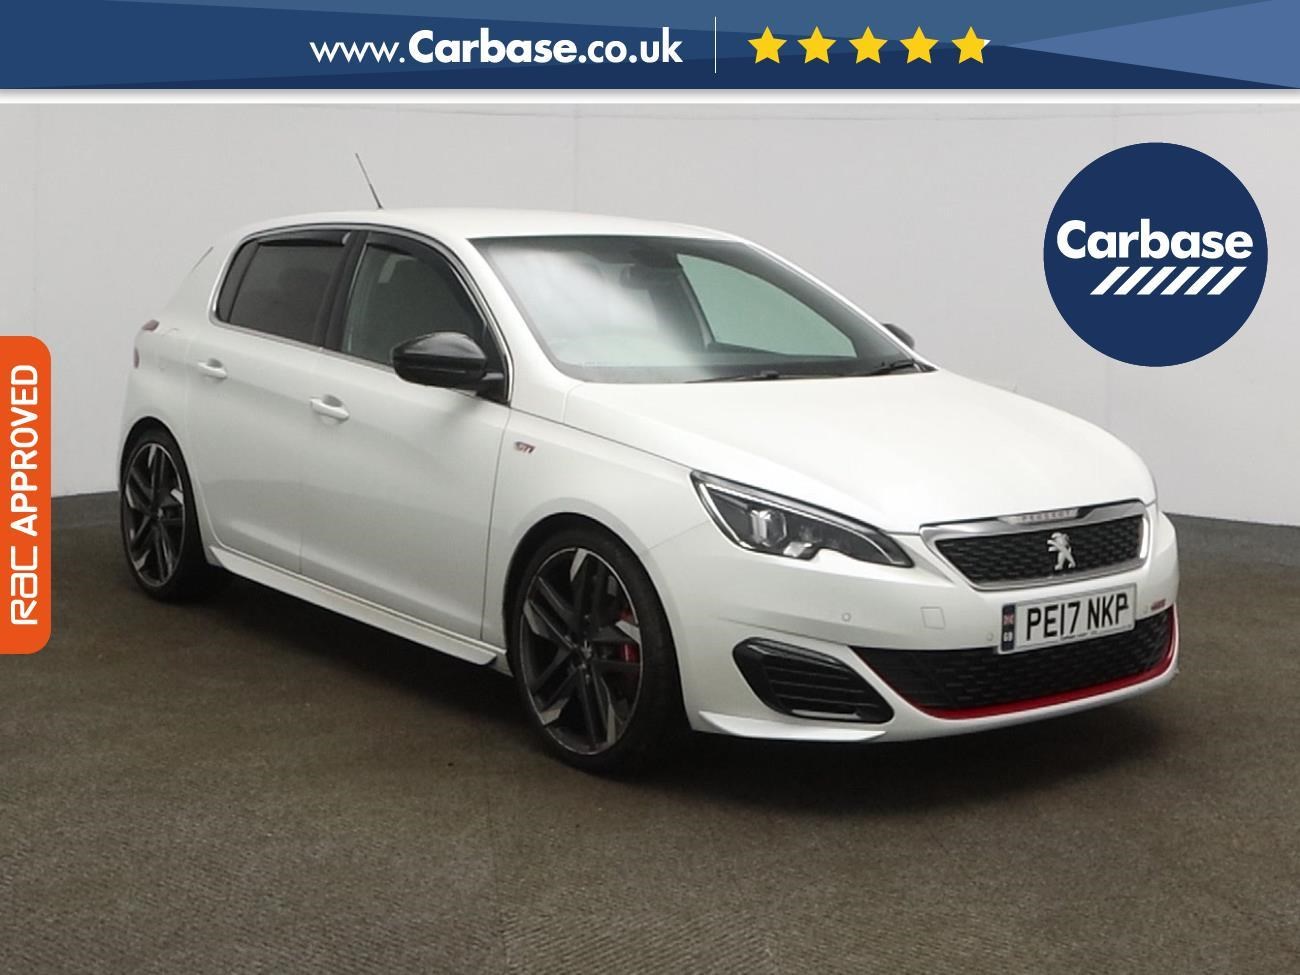 Peugeot 308 Cars for Sale in Bristol, Bath and Somerset - Carbase